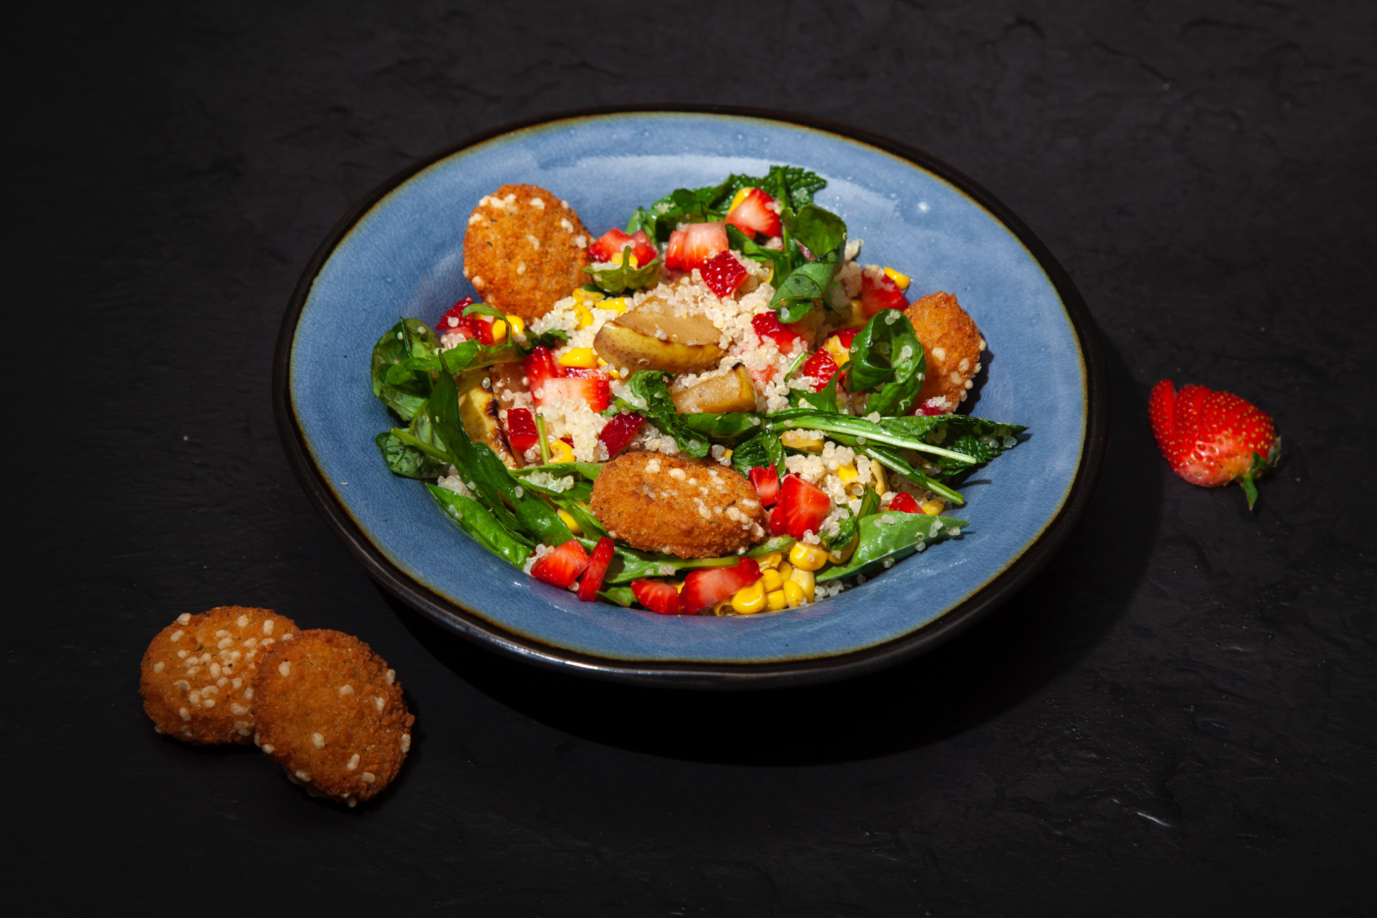 Deep Fried Camembert Salad With Pear And Strawberry